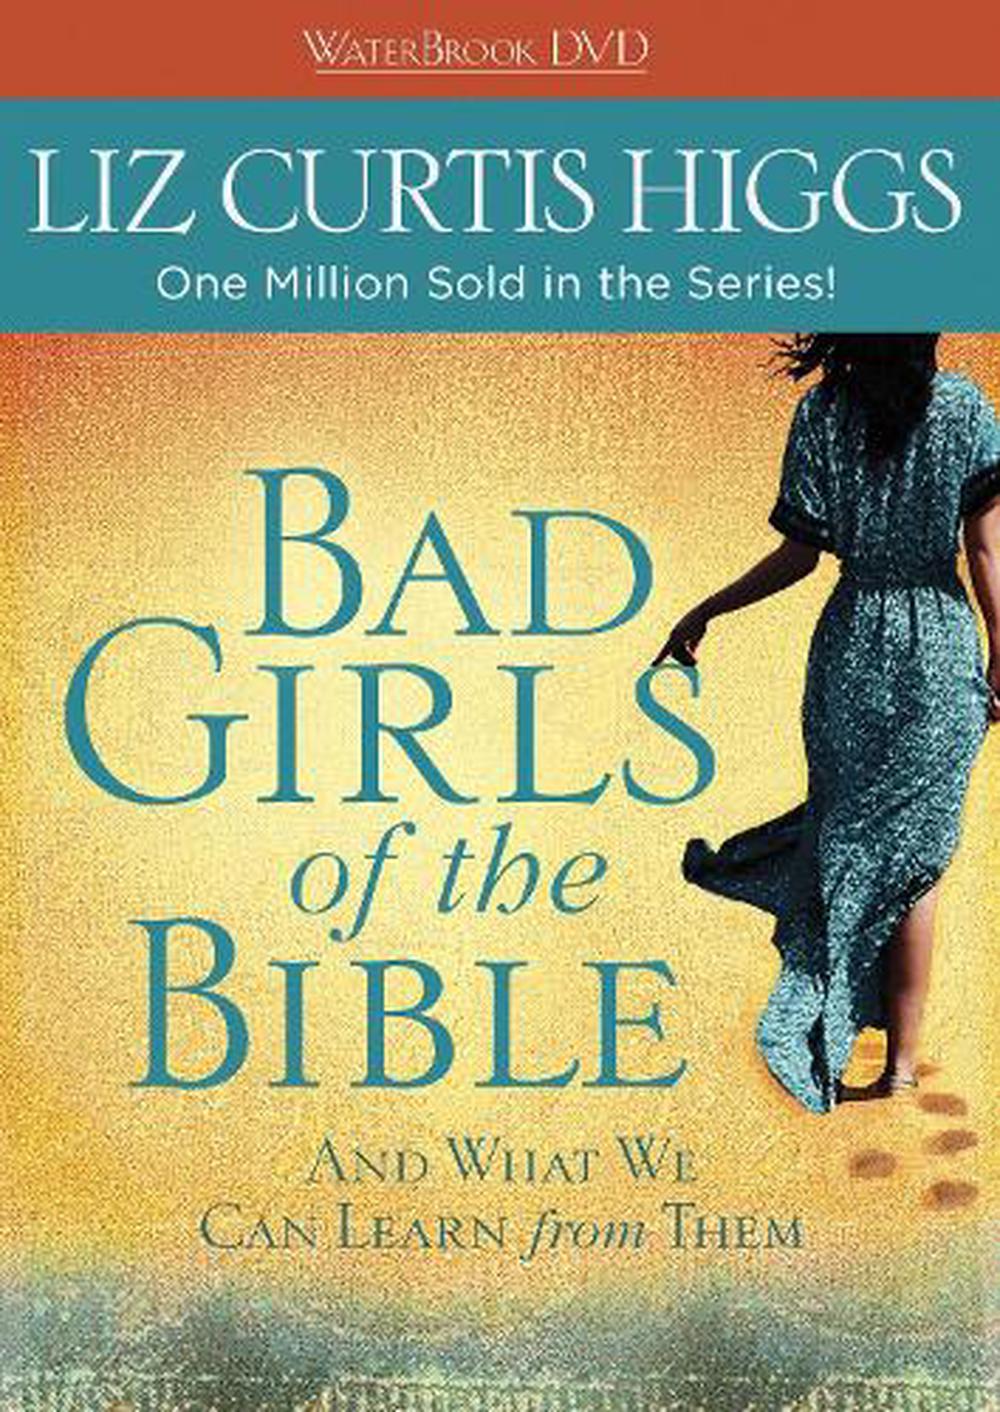 Bad Girls Of The Bible Dvd By Liz Curtis Higgs Dvd Video